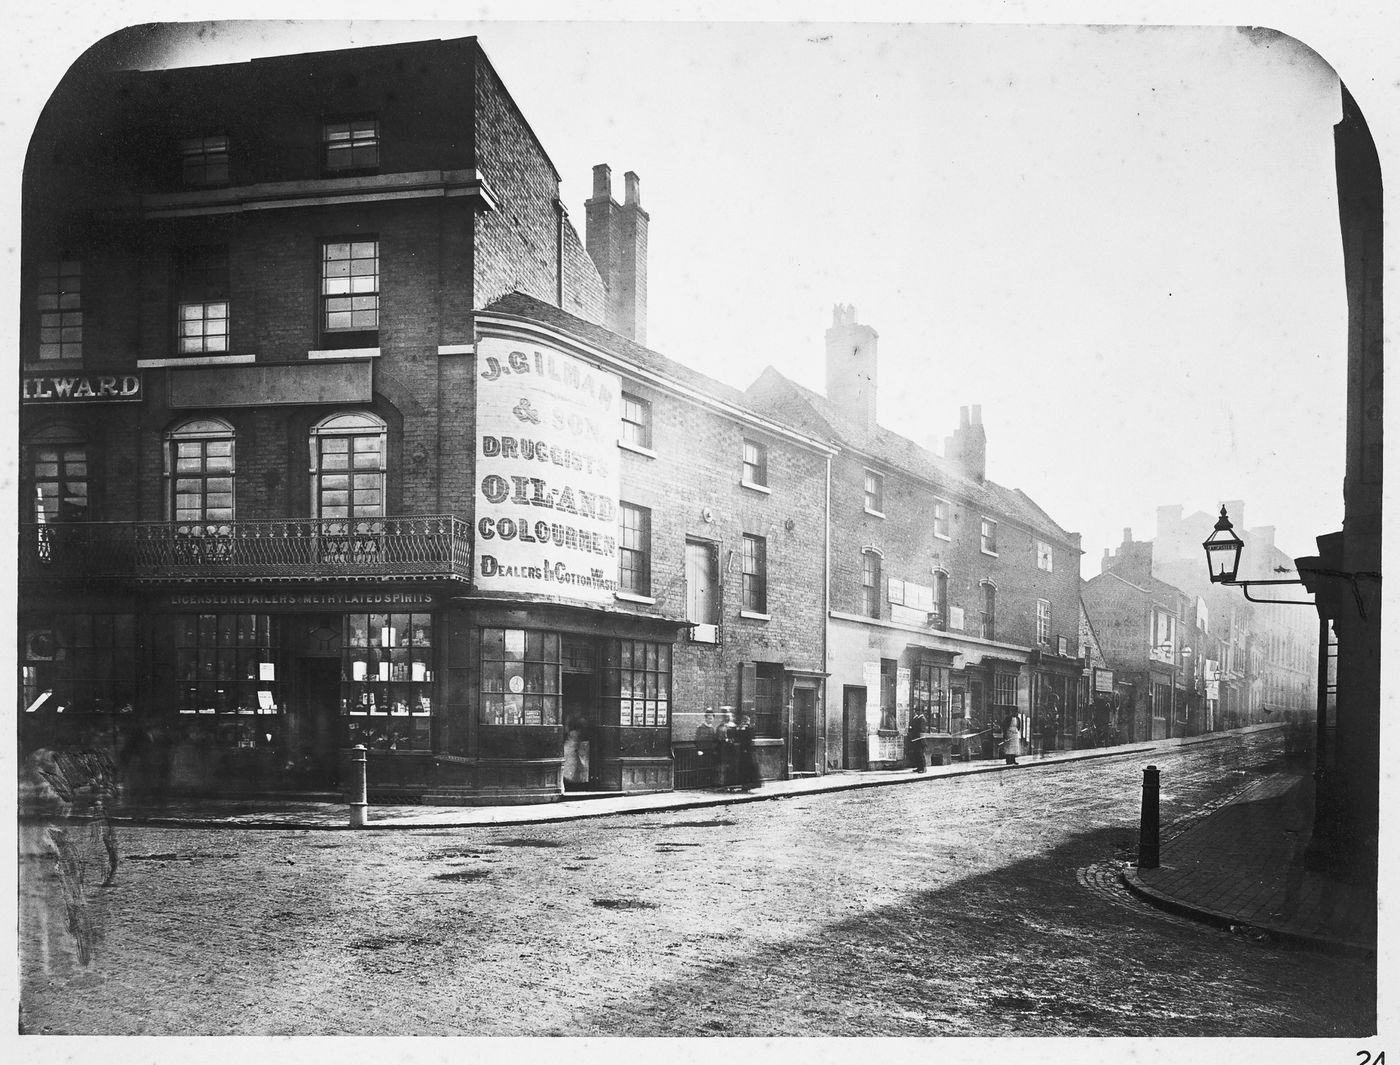 View of Steelhouse Lane, particularly the shop of J. Gilman & Son, Druggists Oil and colarmen dealers in cotton waste, Birmingham, England